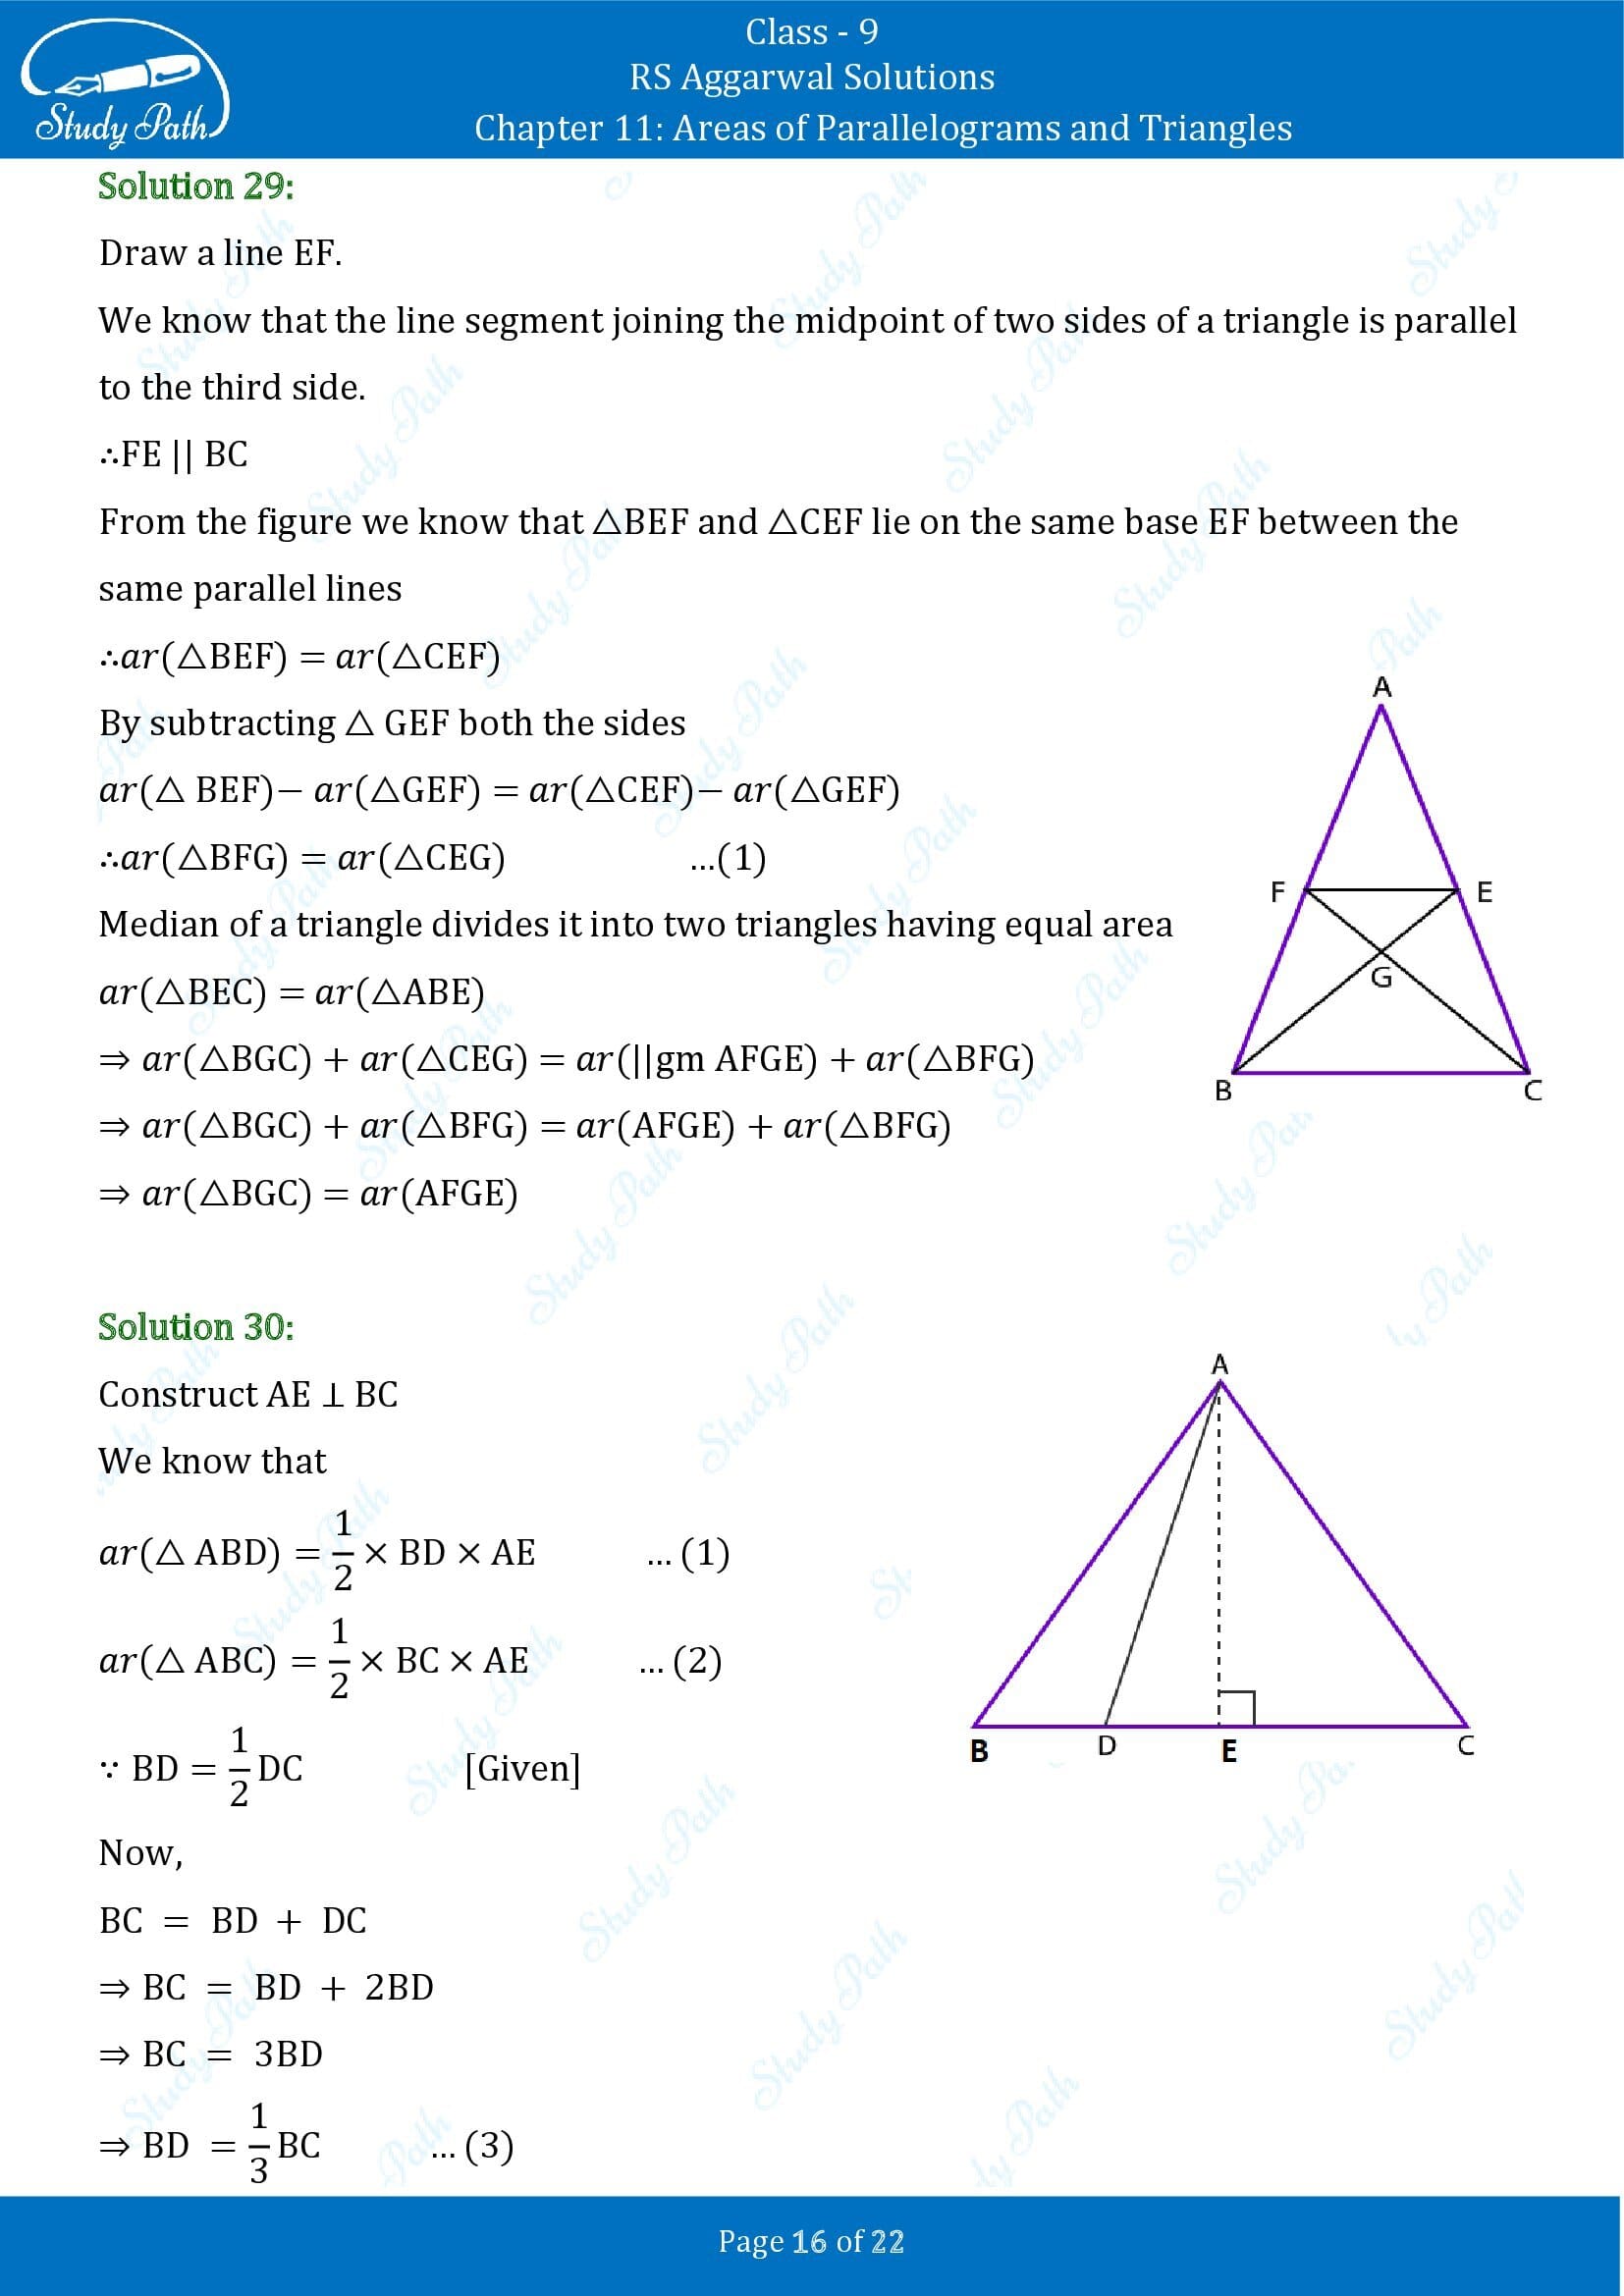 RS Aggarwal Solutions Class 9 Chapter 11 Areas of Parallelograms and Triangles Exercise 11 00016